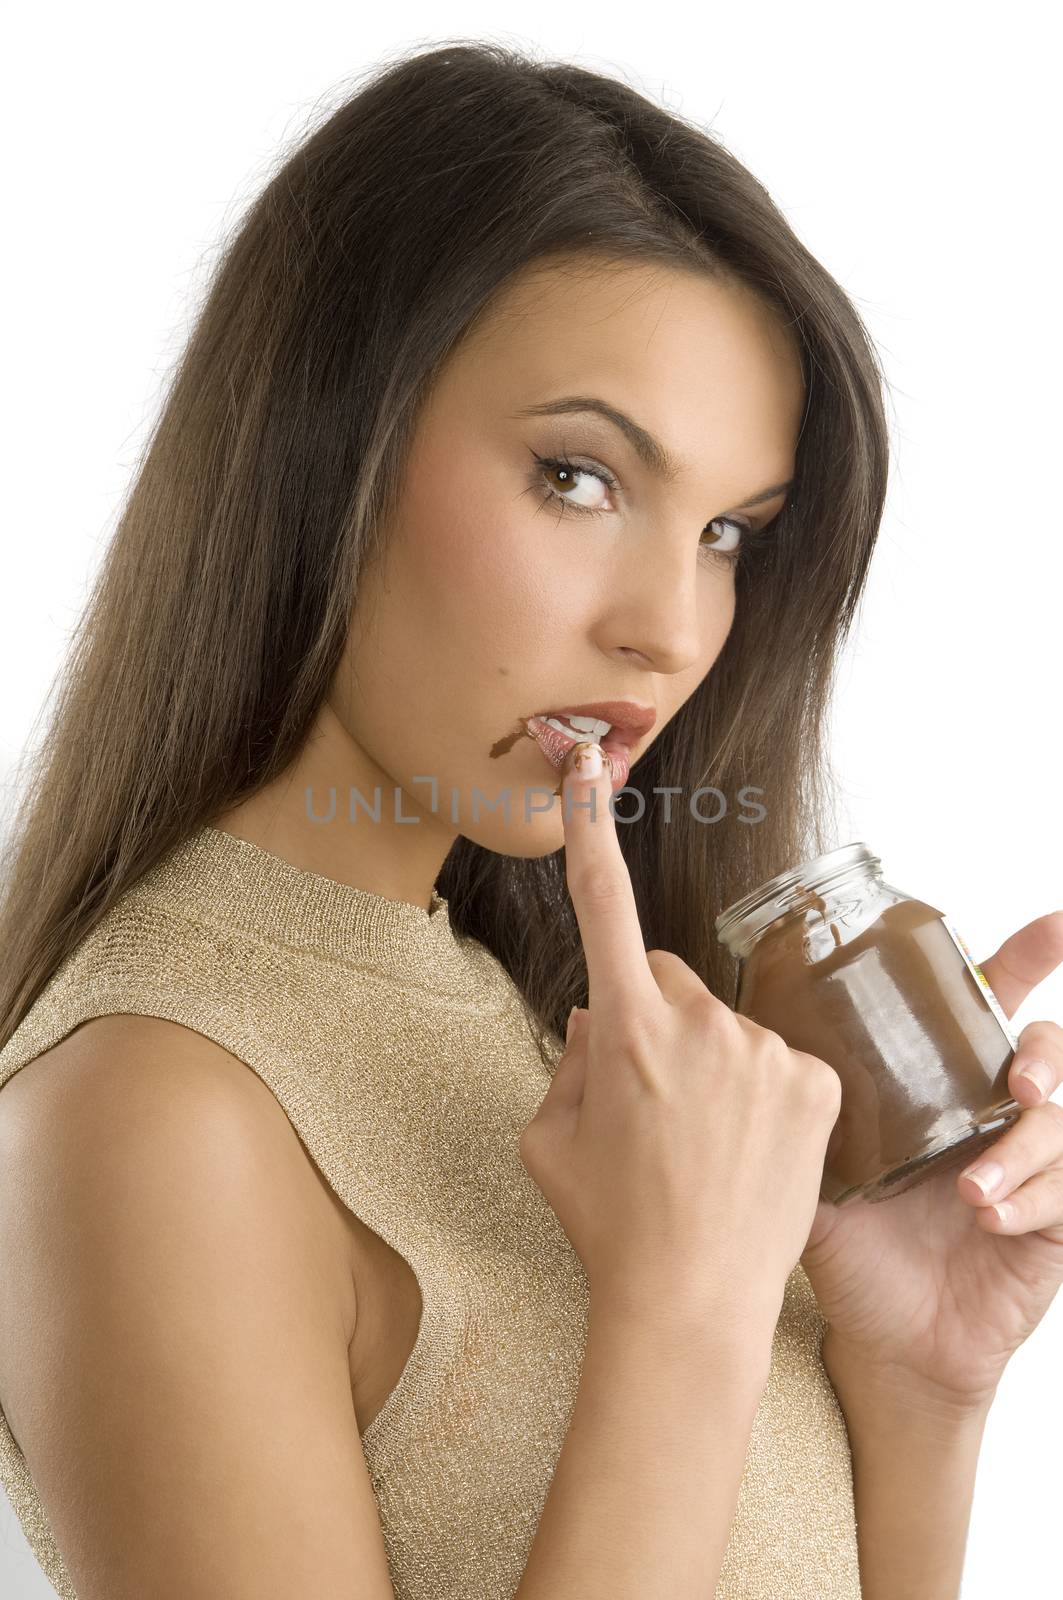 chocolate on finger by fotoCD